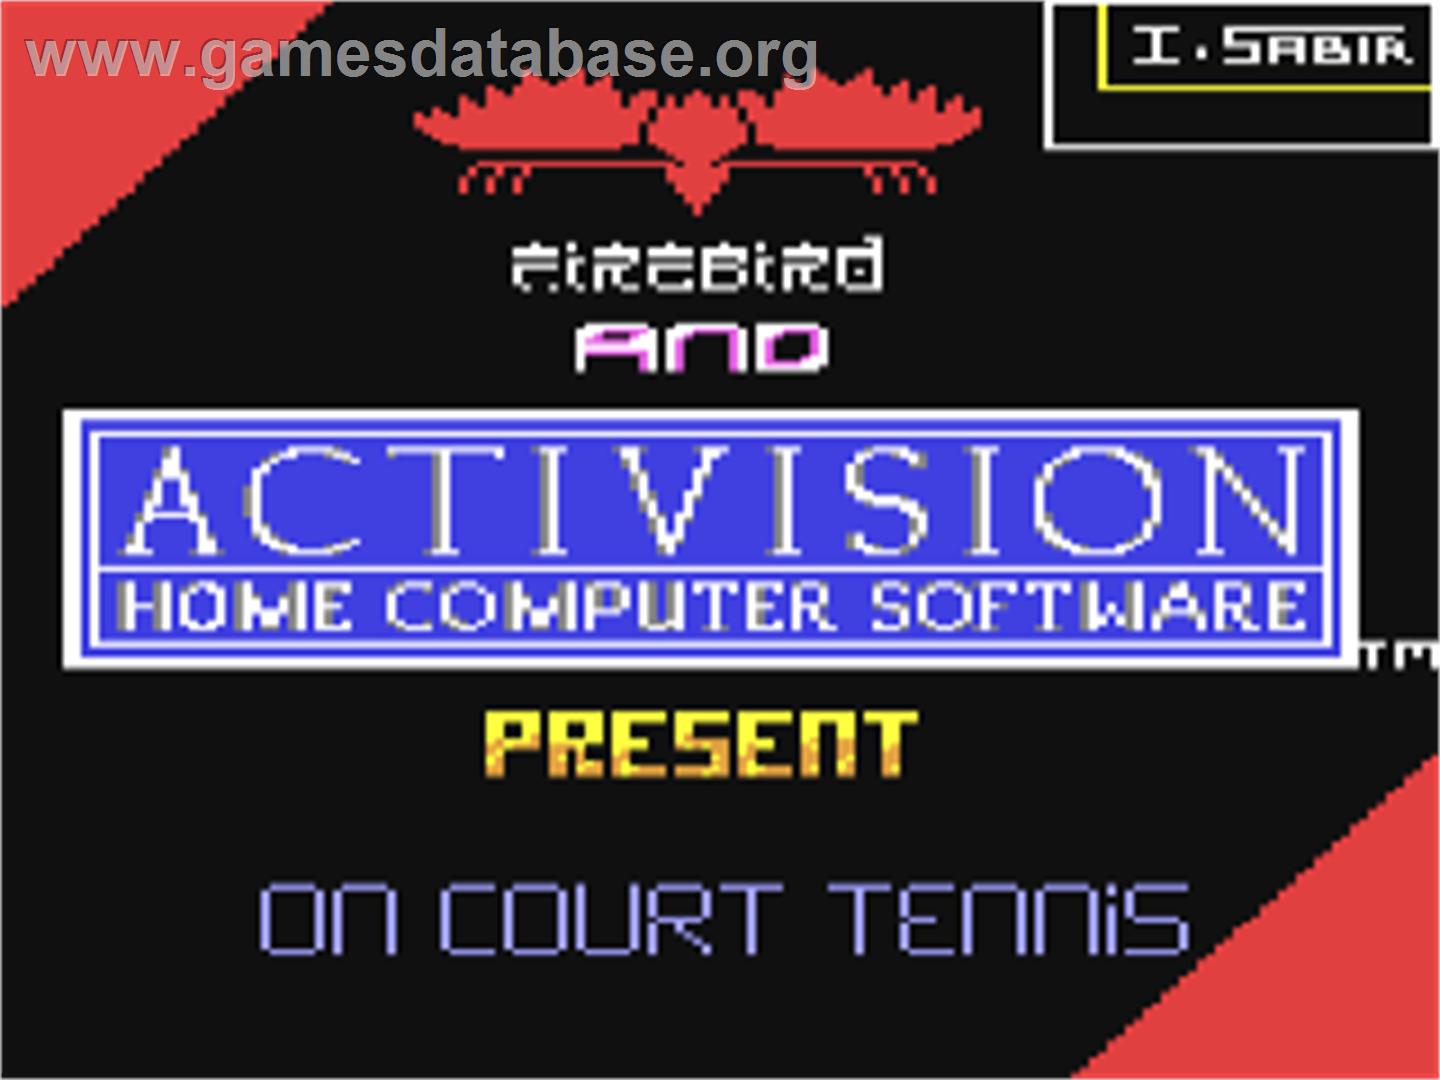 On-Court Tennis - Commodore 64 - Artwork - Title Screen